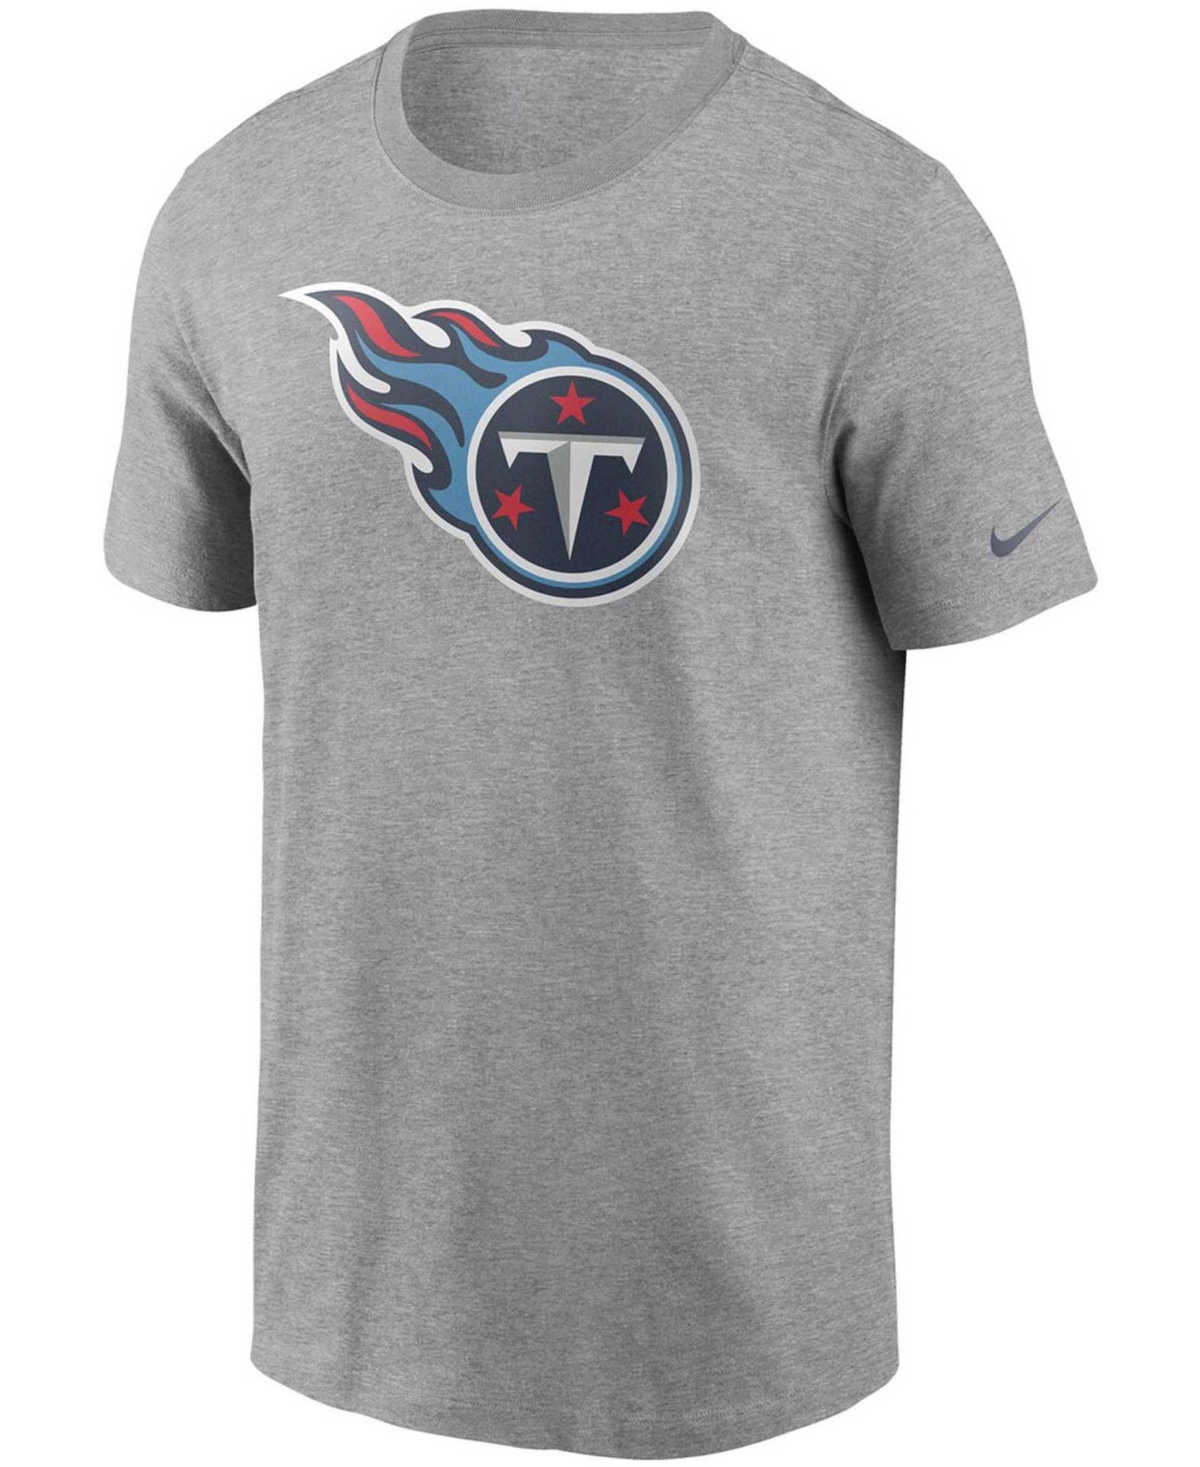 Shop Nike Men's  Heathered Gray Tennessee Titans Primary Logo T-shirt